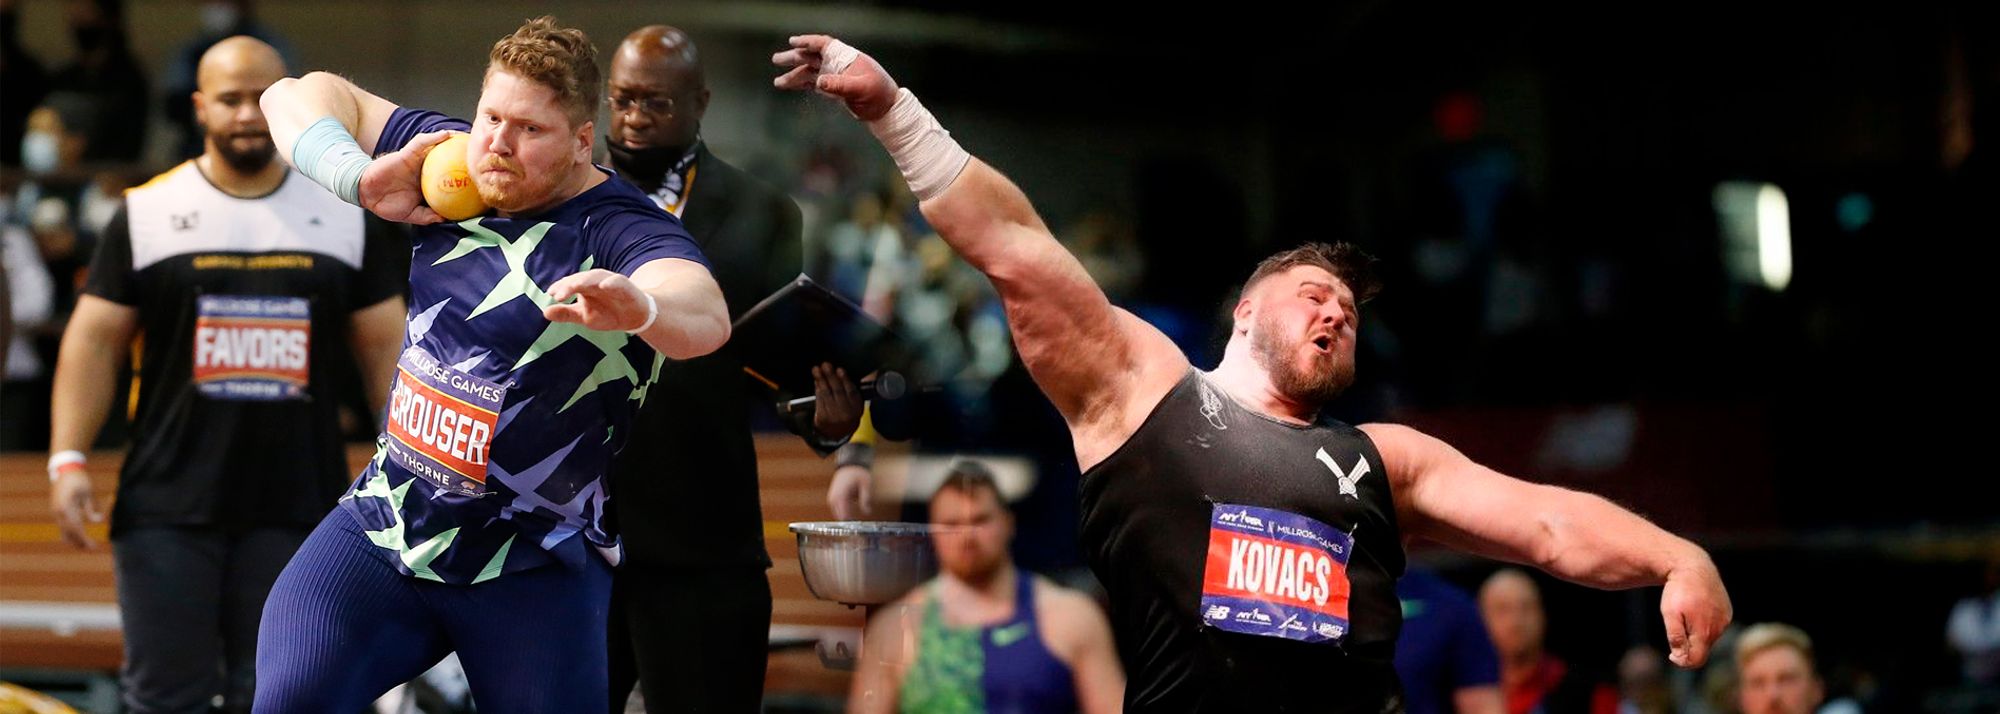 Ryan Crouser and Joe Kovacs will renew their shot put rivalry at the Millrose Games